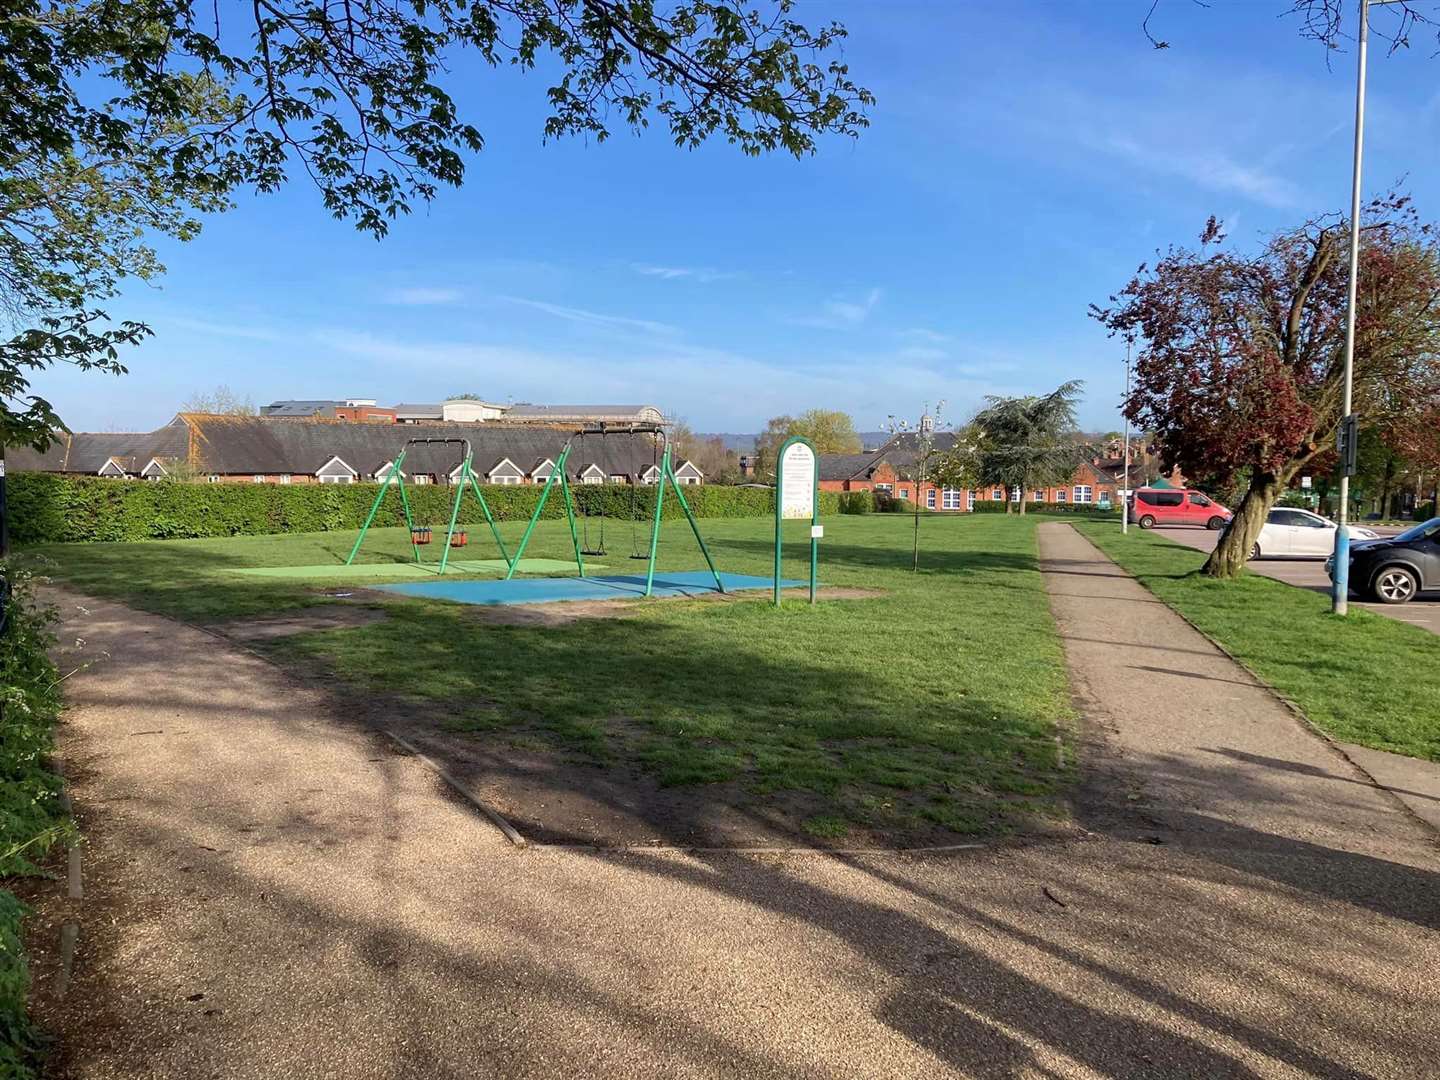 The Upper Castle Fields swings and green space is at risk